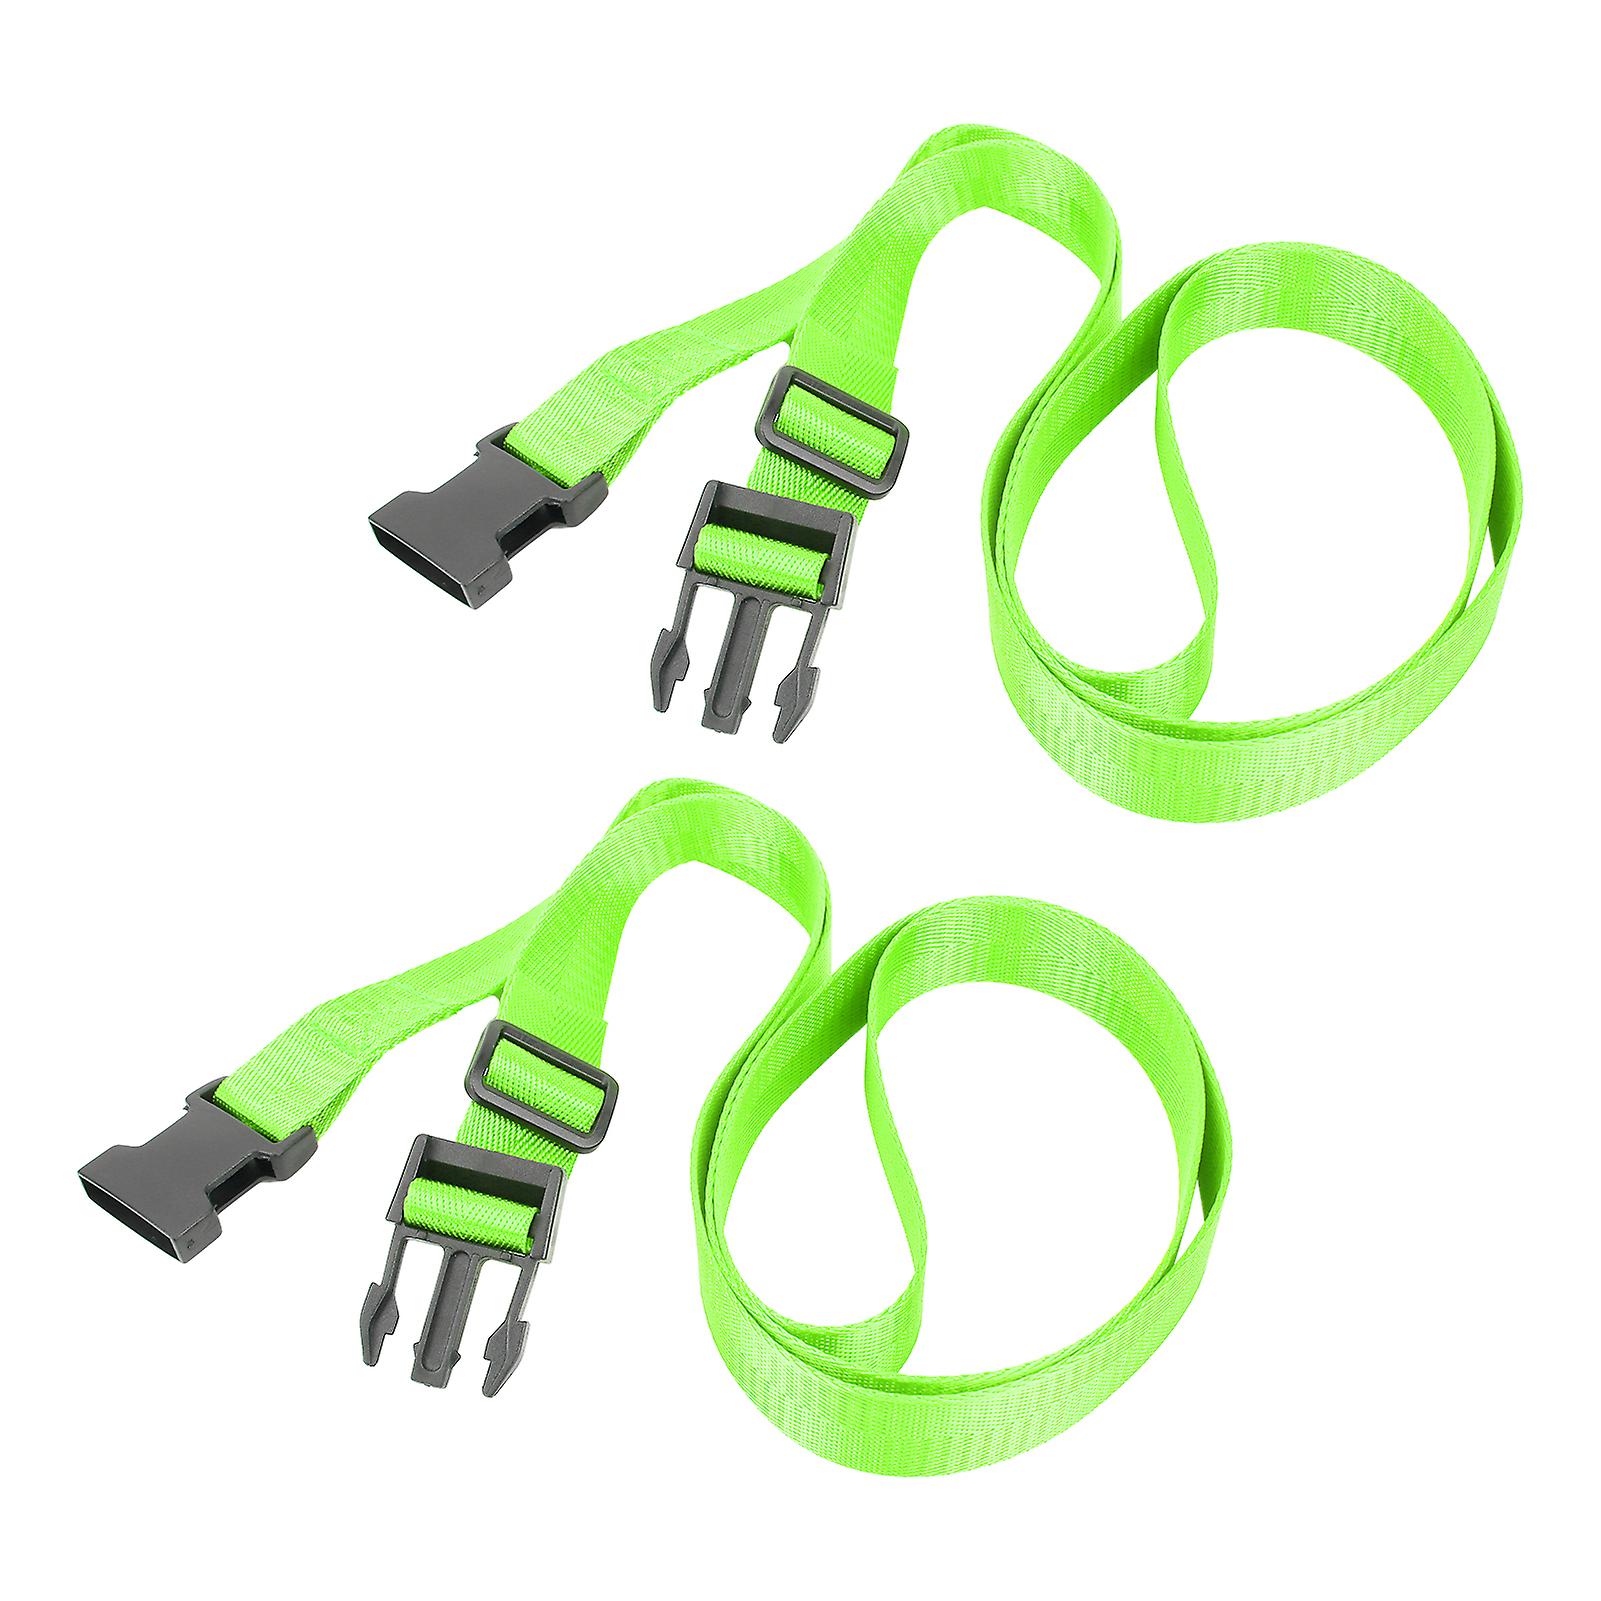 Travel Luggage Strap Adjustable Password Lock Packing Belt Baggage Secure Lock Strapfluorescent Green